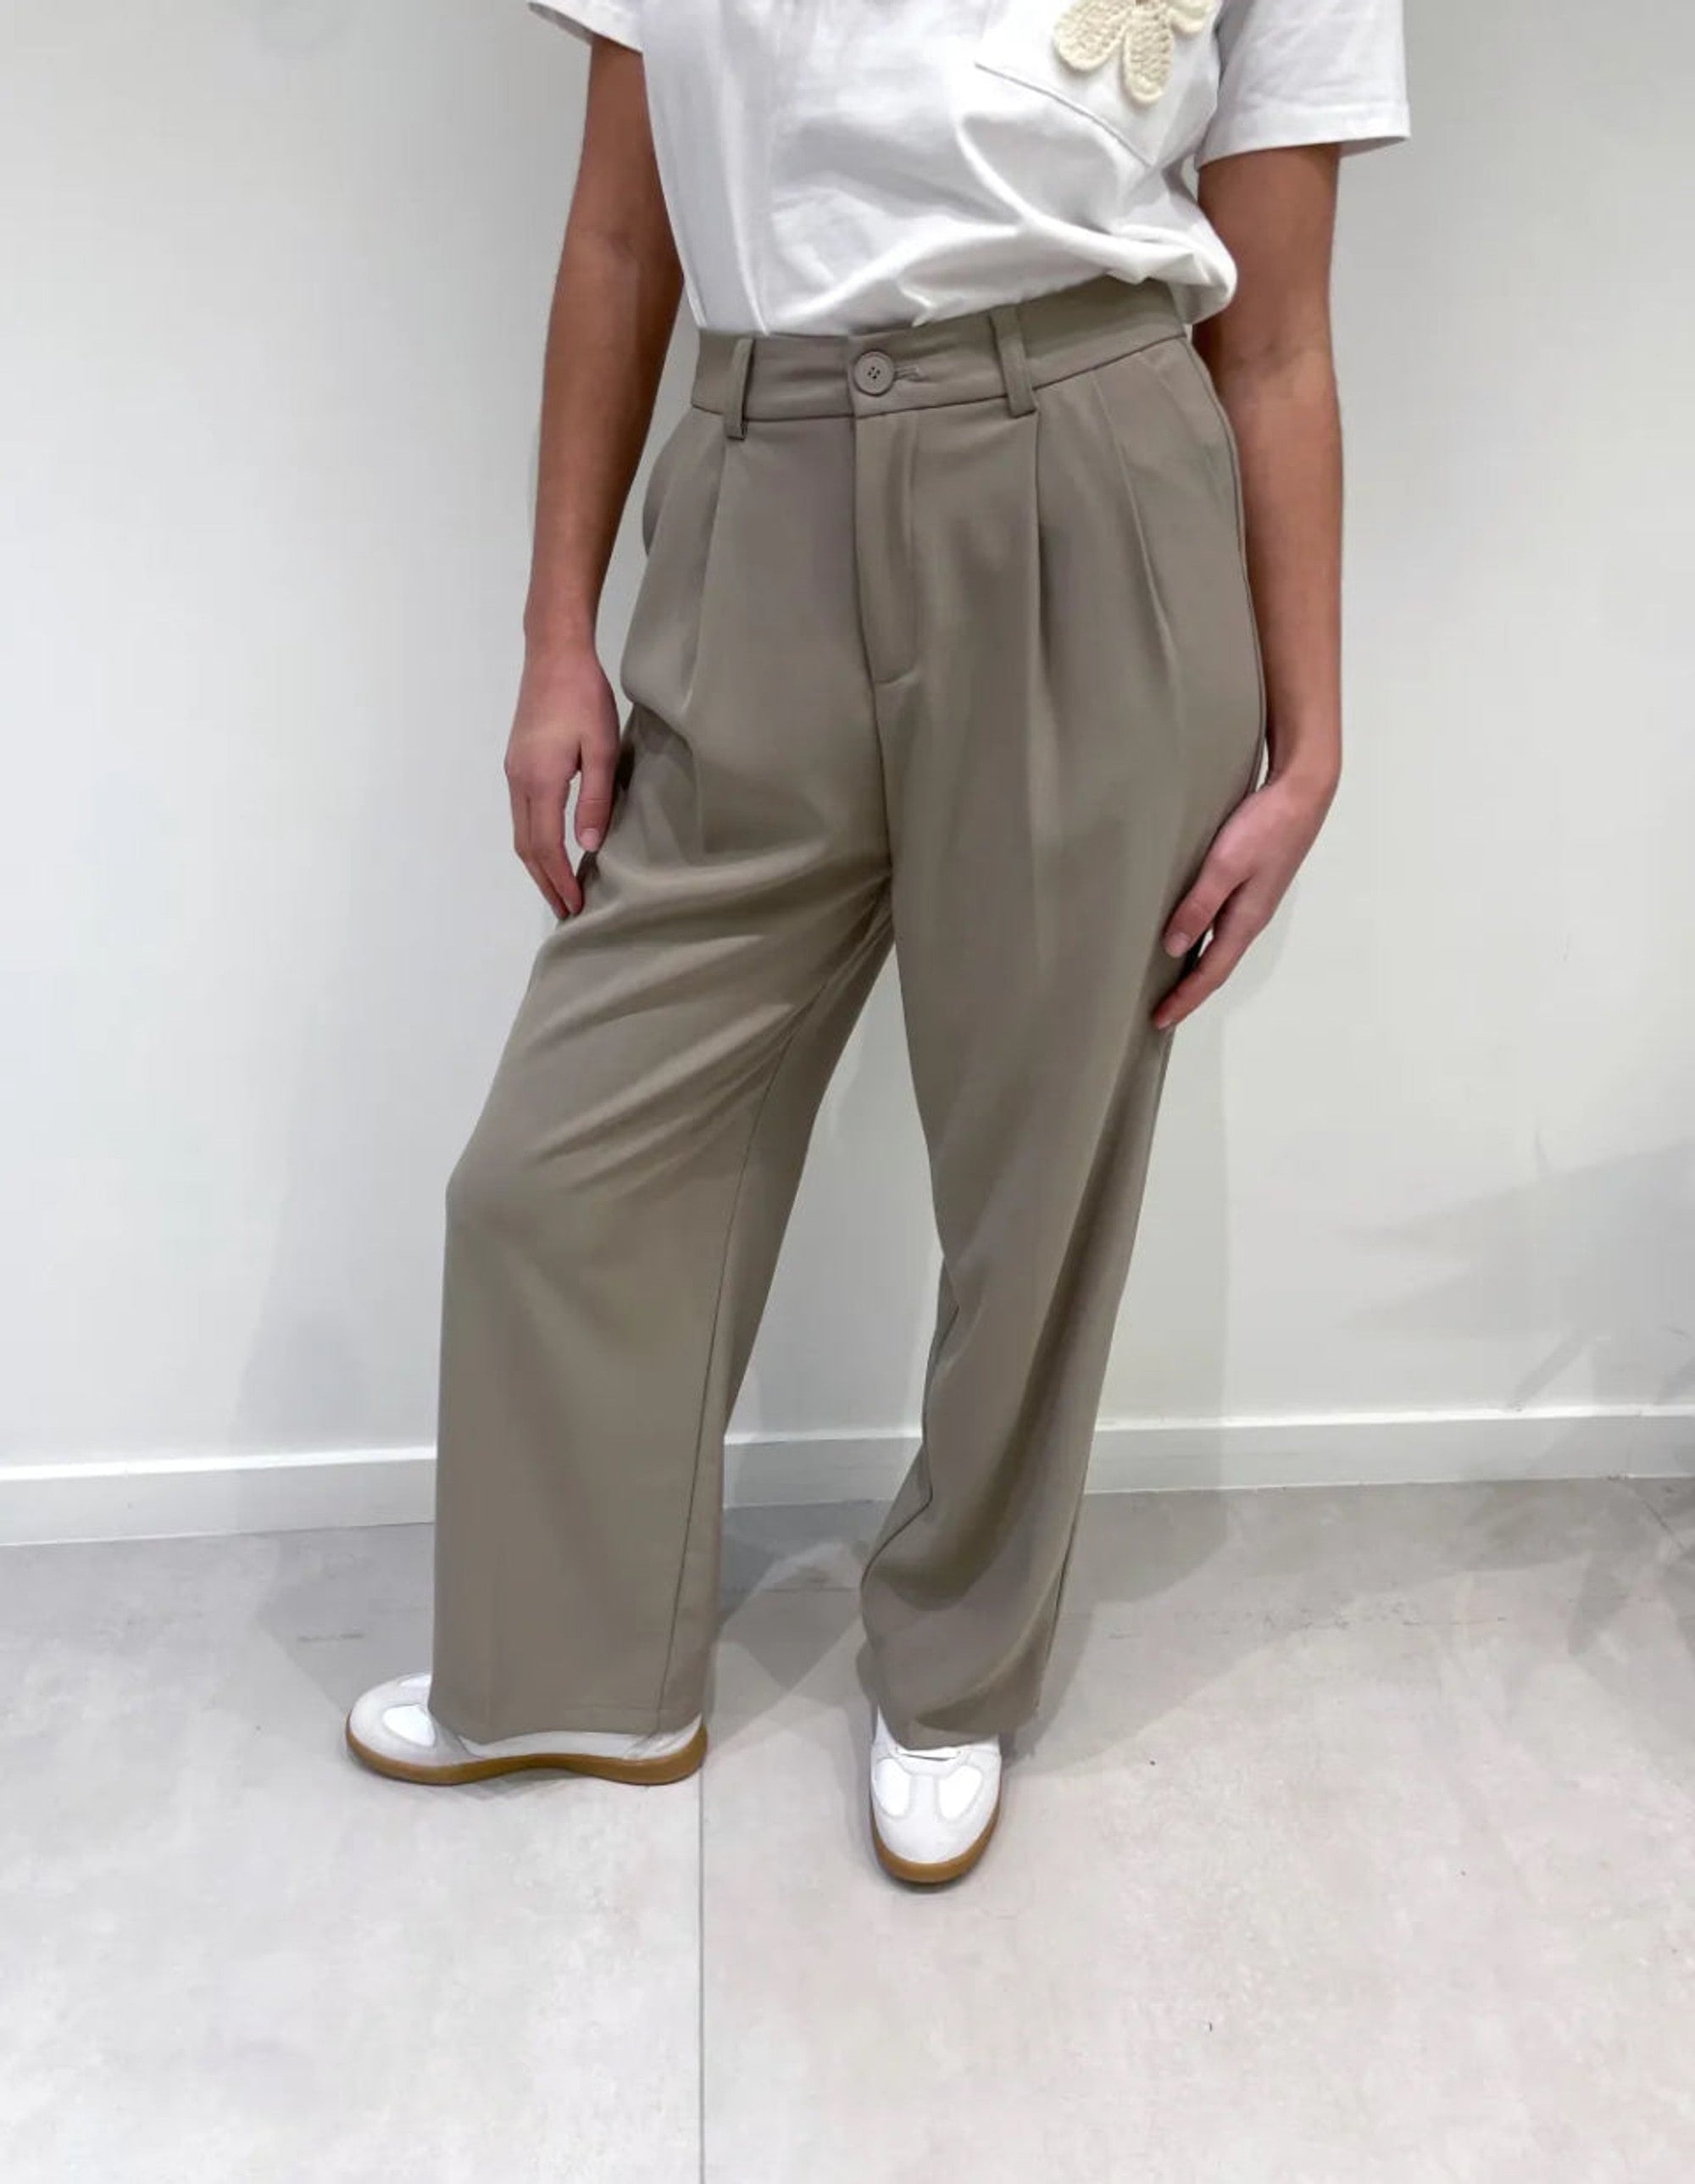 Clever Alice Taupe Trouser - clever alice